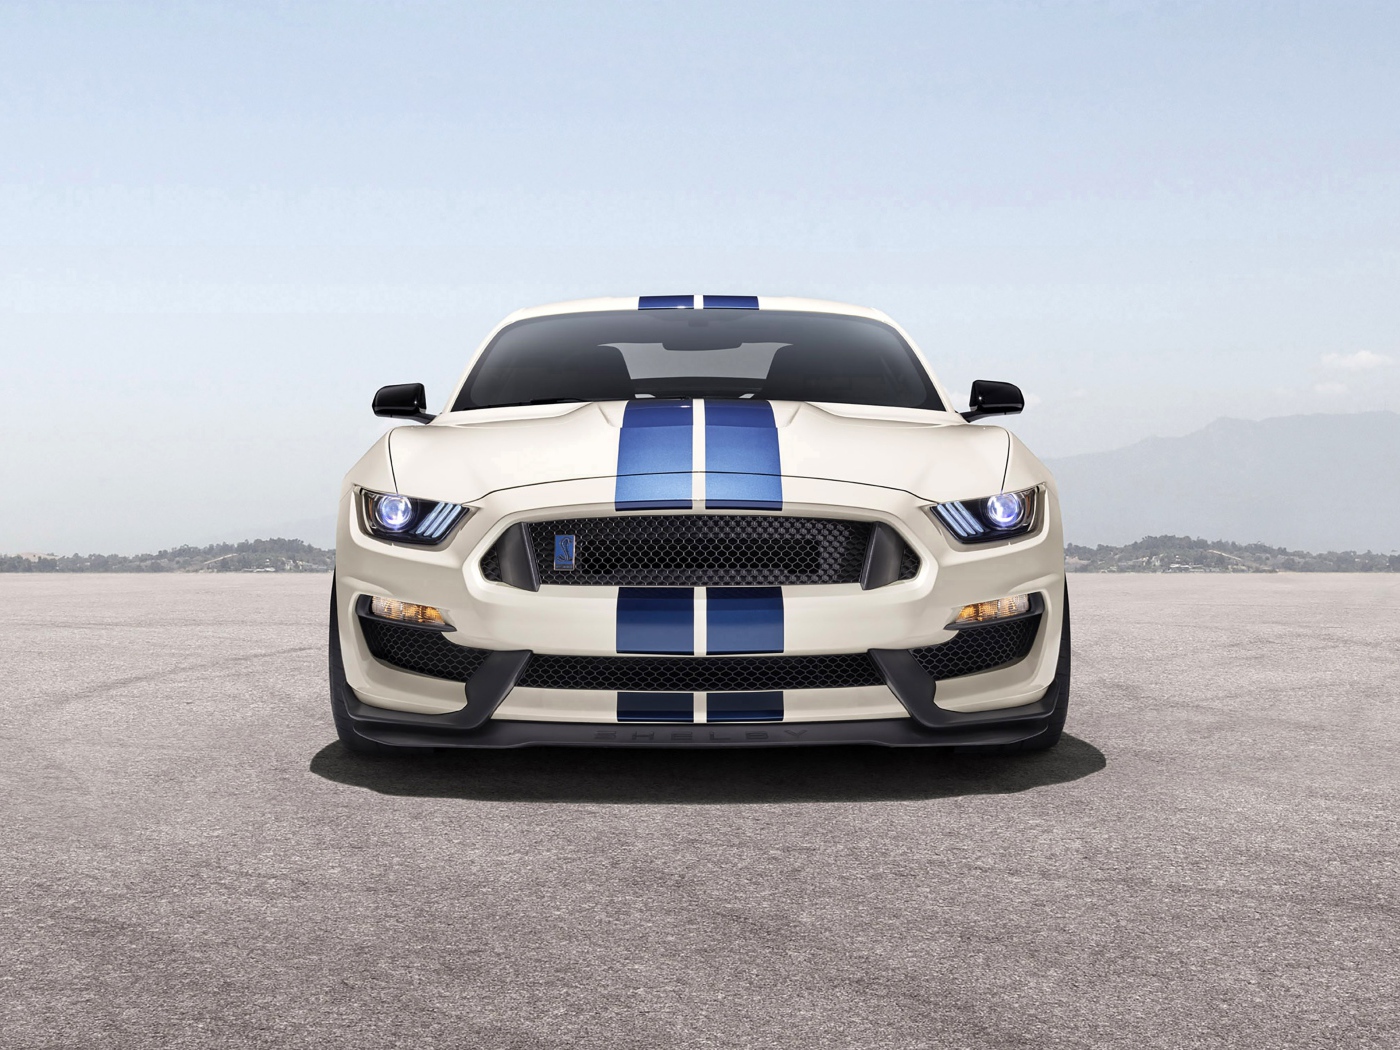 Shelby GT350 car, 2020 front view